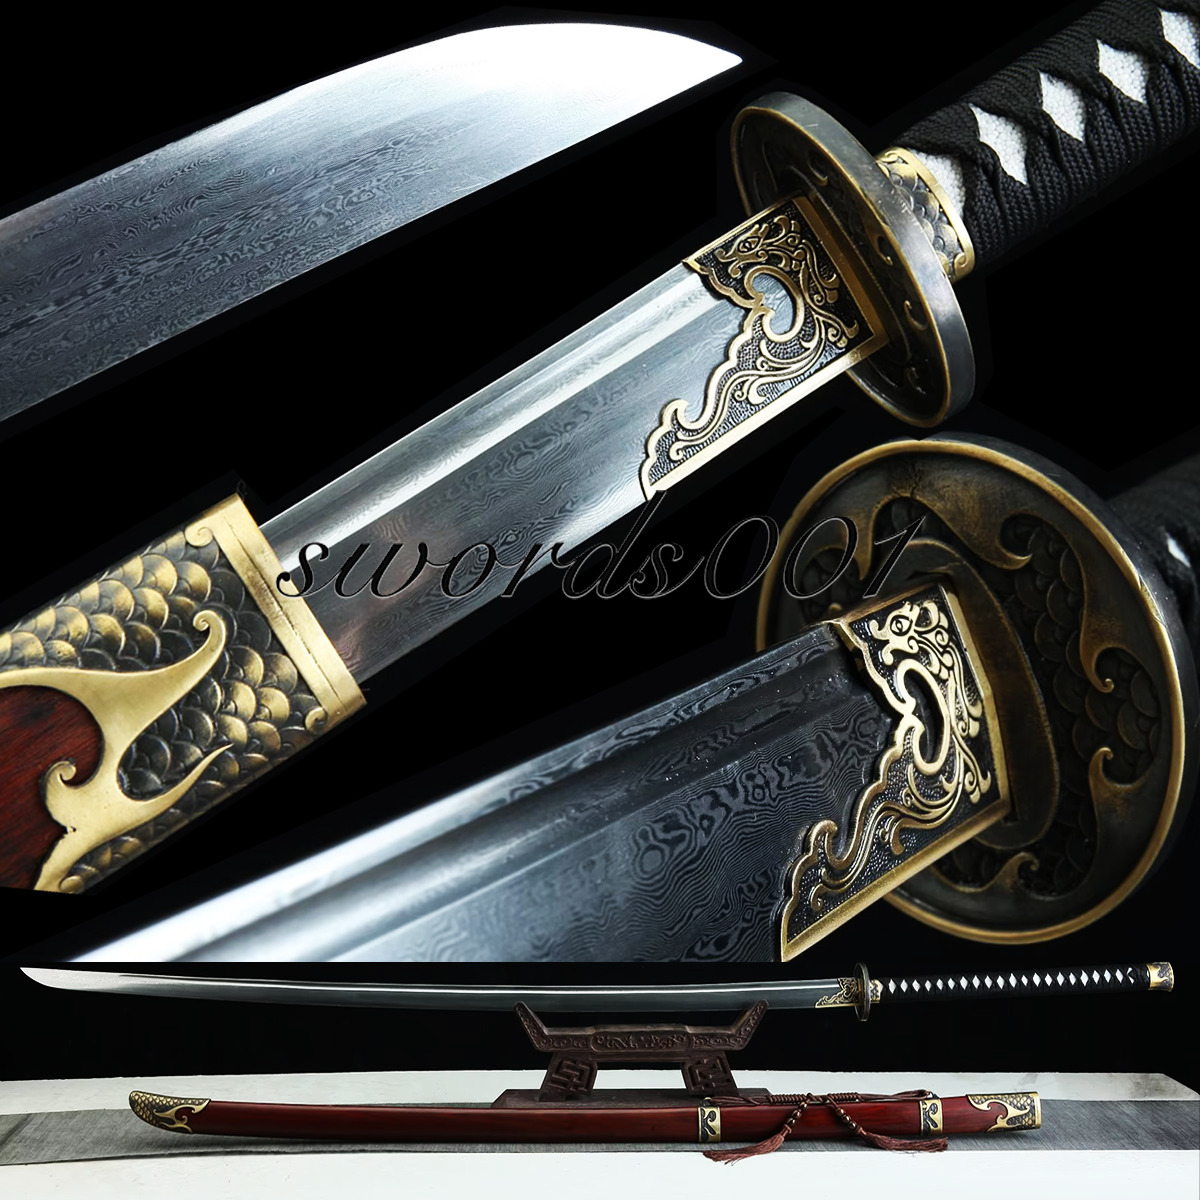 59'' Sharp Miao Dao Broadsword Chinese Saber Folded Steel Dragon Scale Fittings